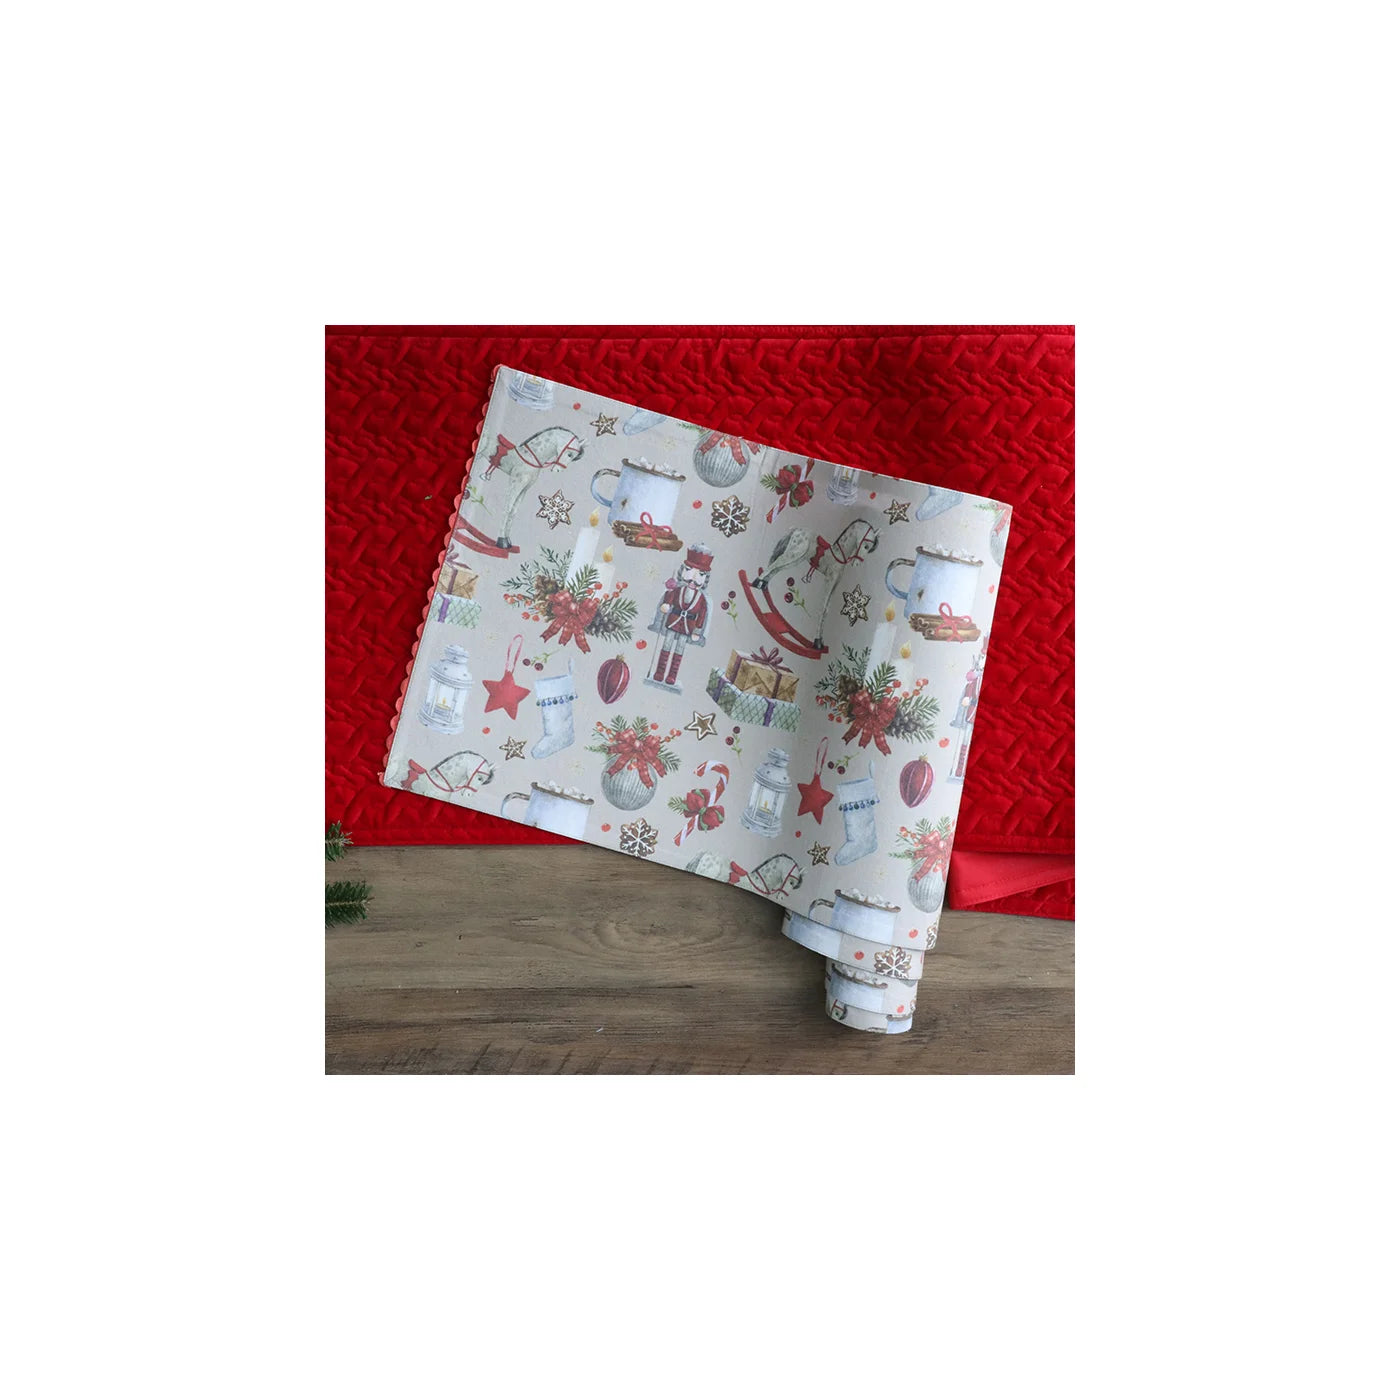 Light grey rolled up table runner with various christmas images on it, in front of a red blanket